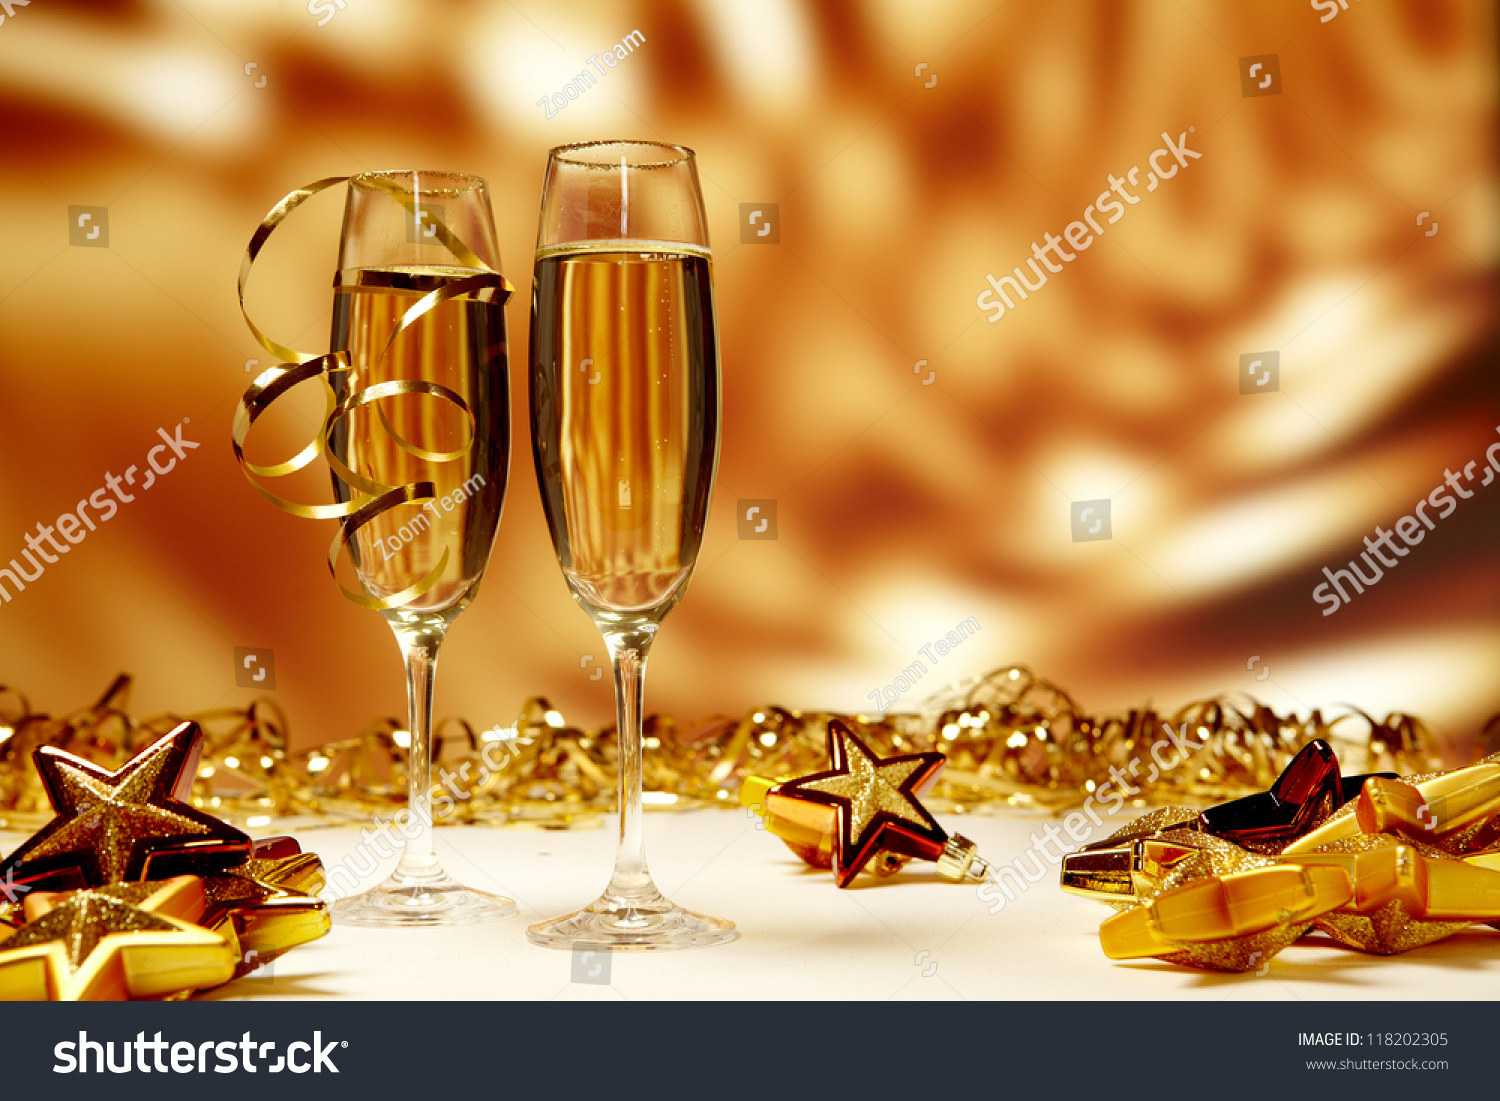 Download Glasses Champagne On Yellow Background Stock Photo Edit Now 118202305 Yellowimages Mockups